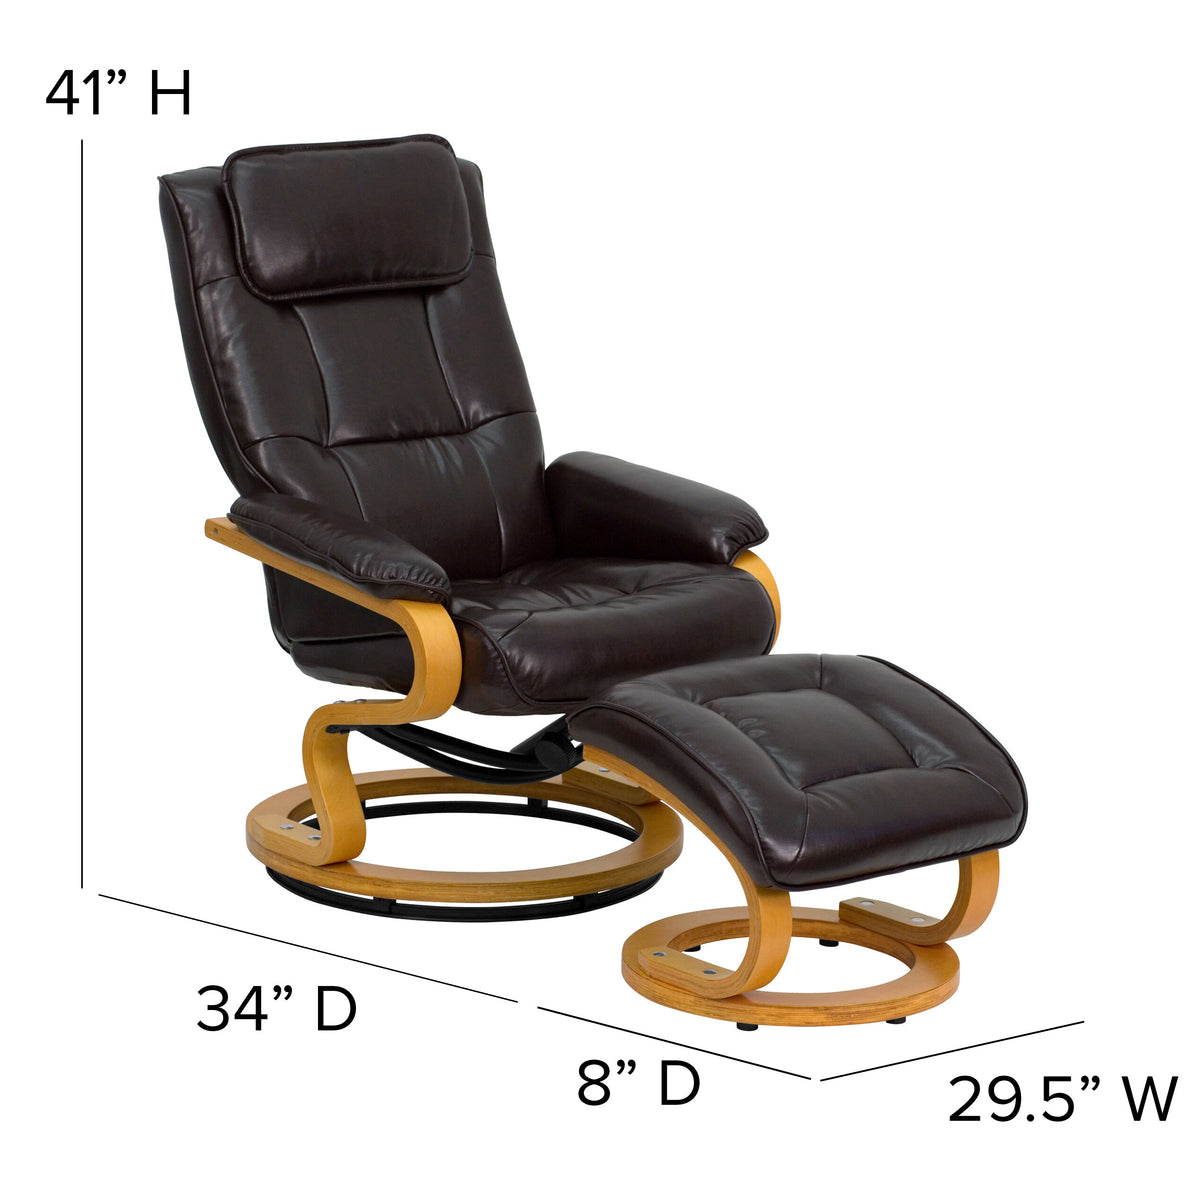 Brown |#| Brown LeatherSoft Adjustable Swivel Recliner &Ottoman w/Maple Wood Base